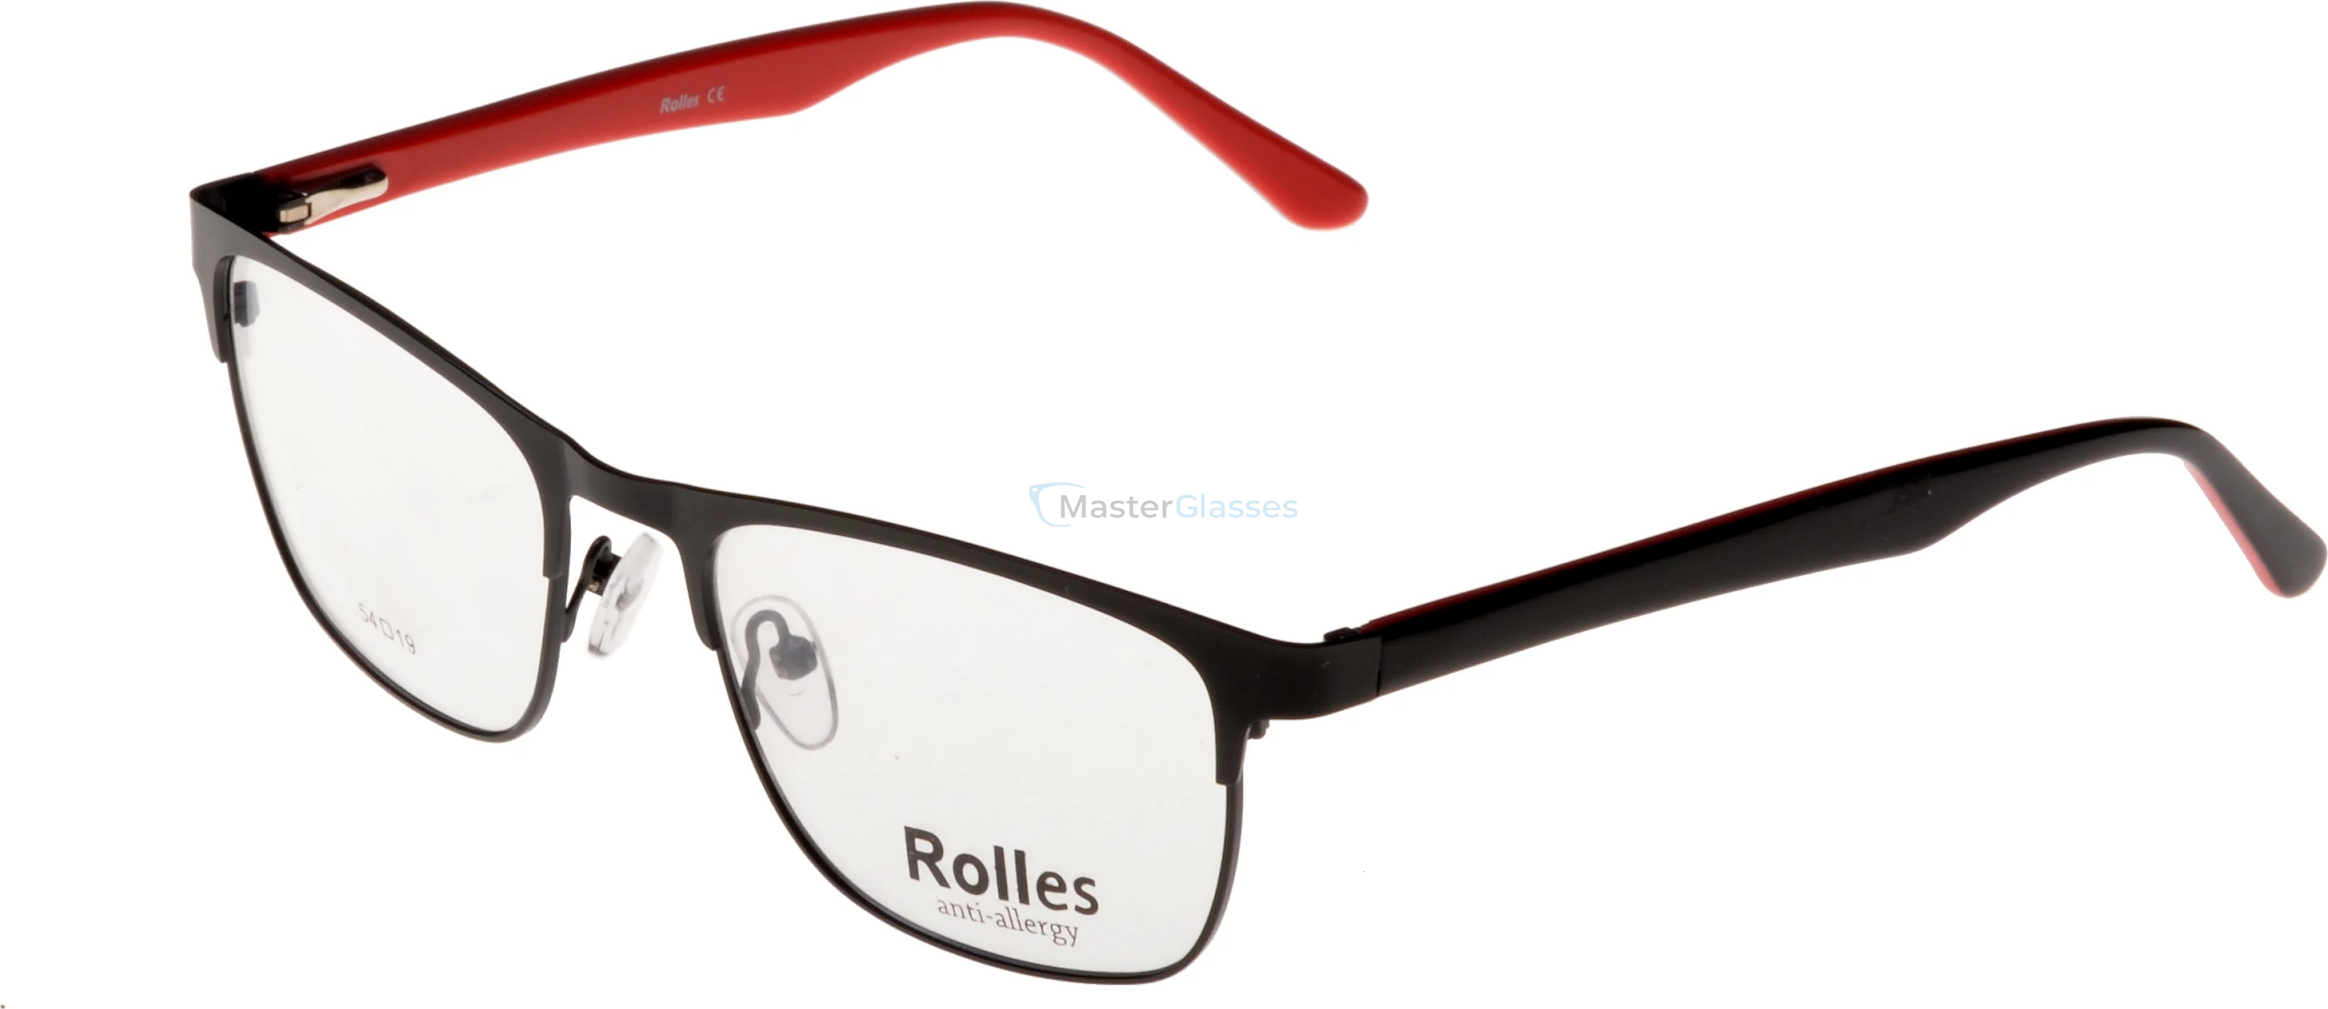  Rolles 461 01